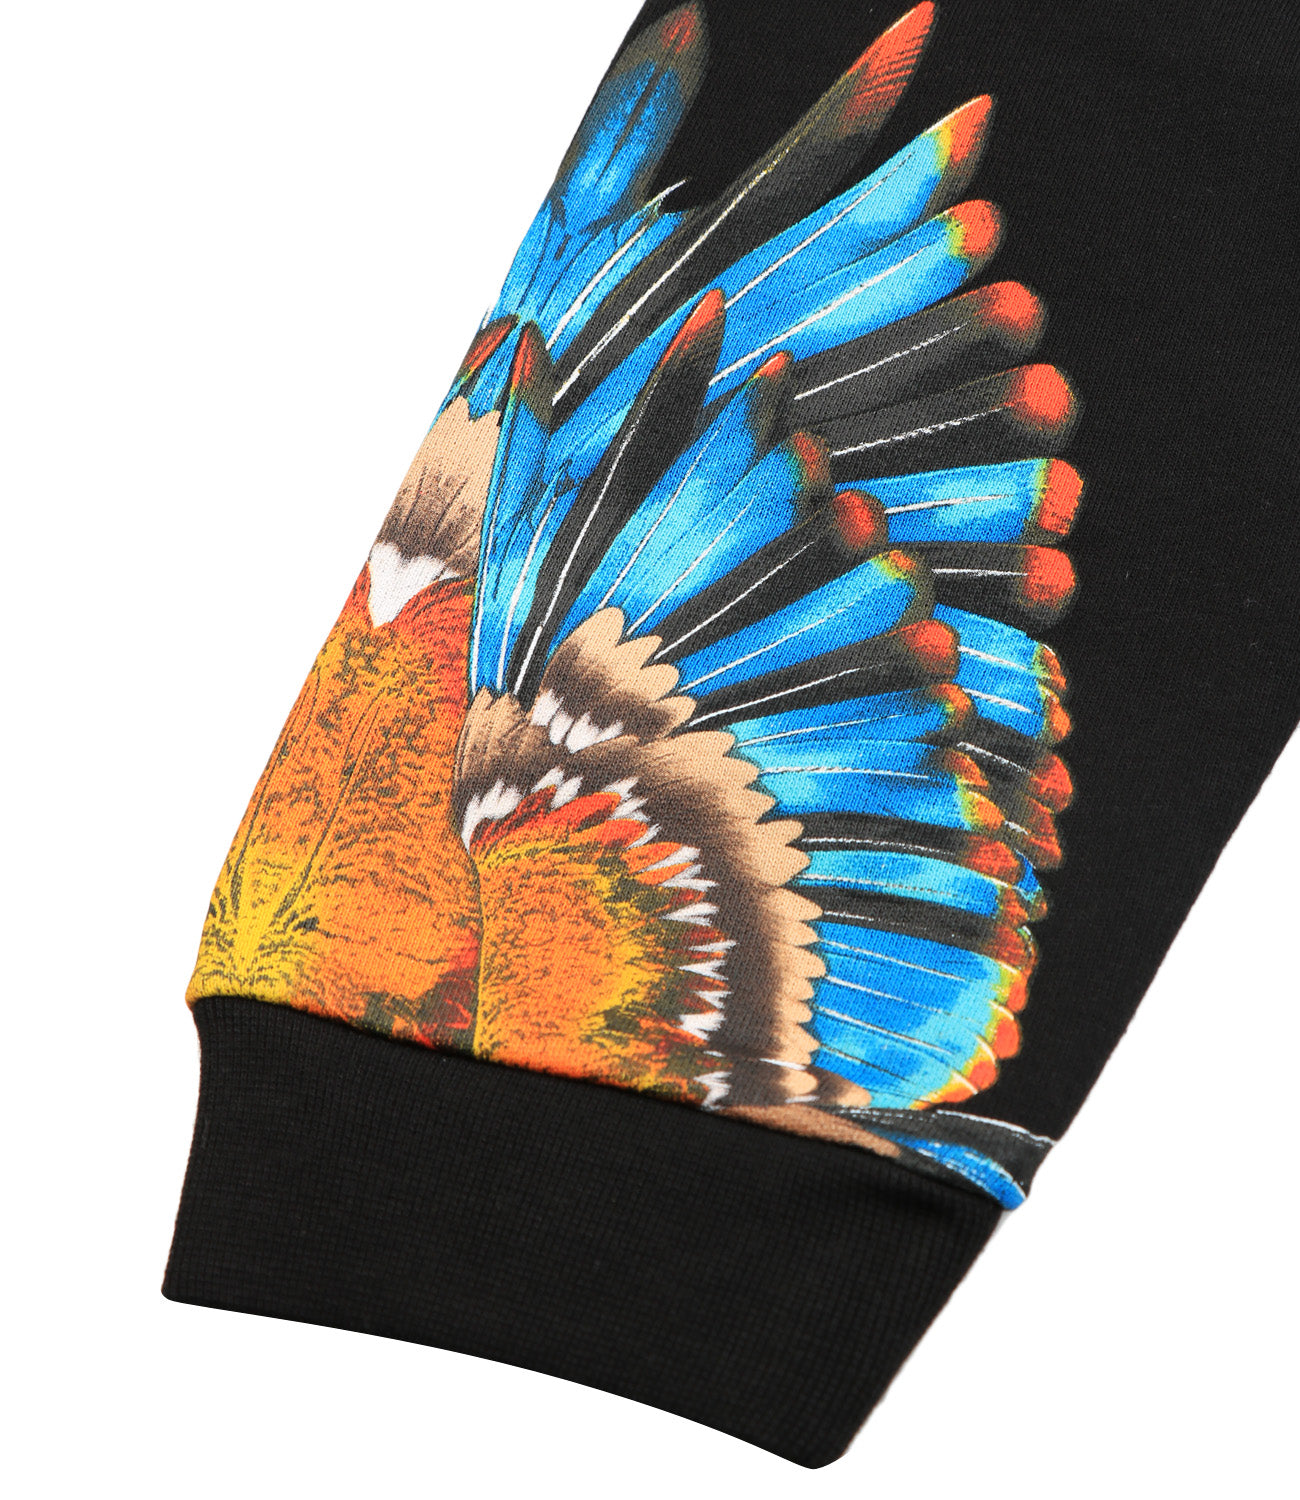 Grizzly Wings Sporty Pants Black